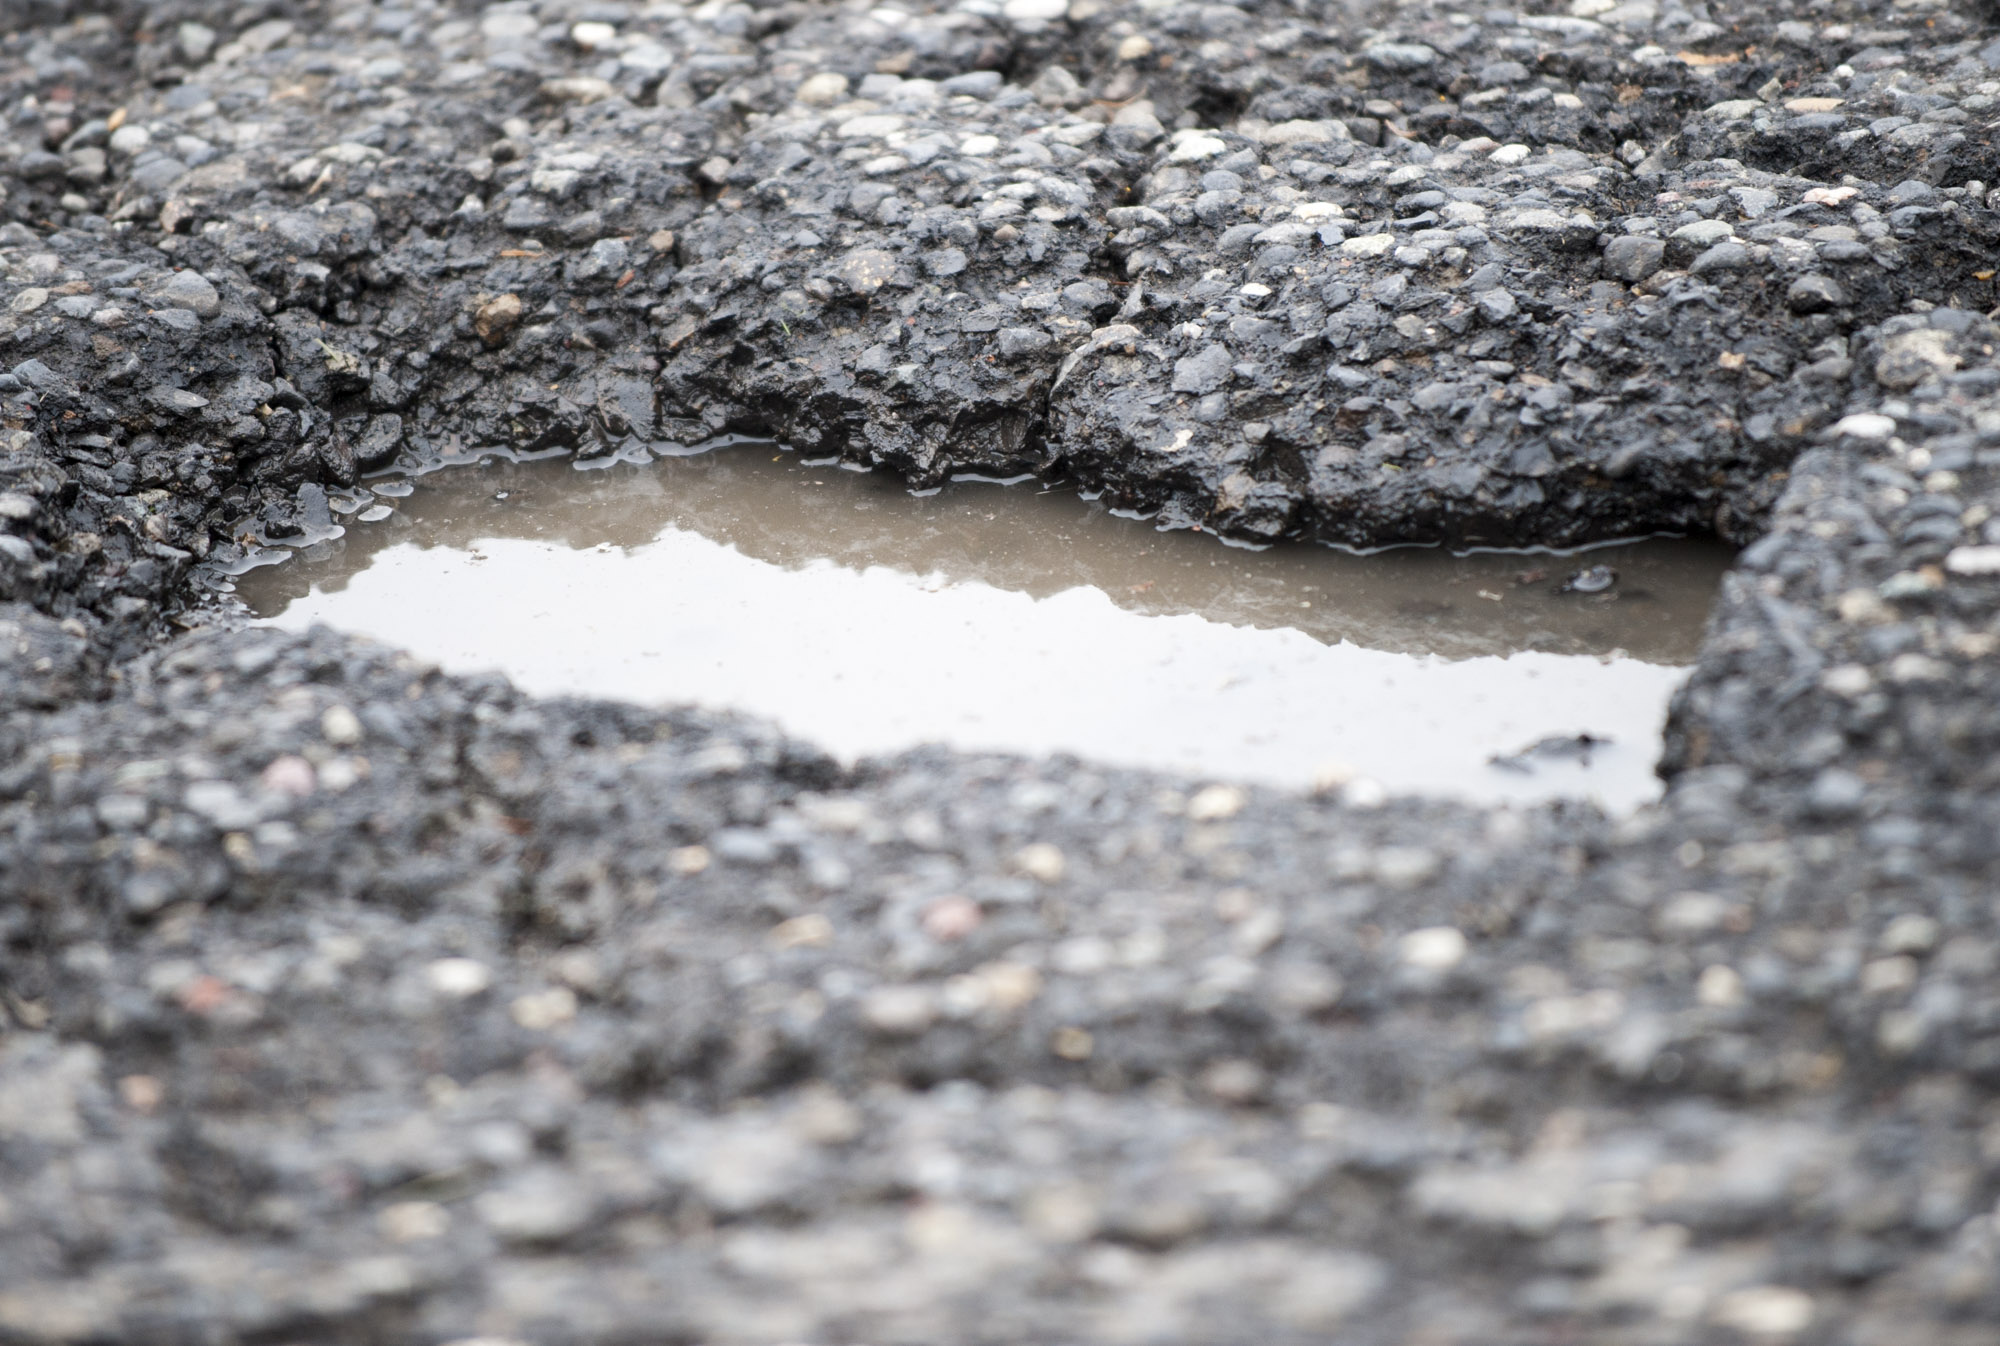 A pothole is seen at the intersection of Northeast 18th Street and 134th Avenue in Vancouver in January 2016.